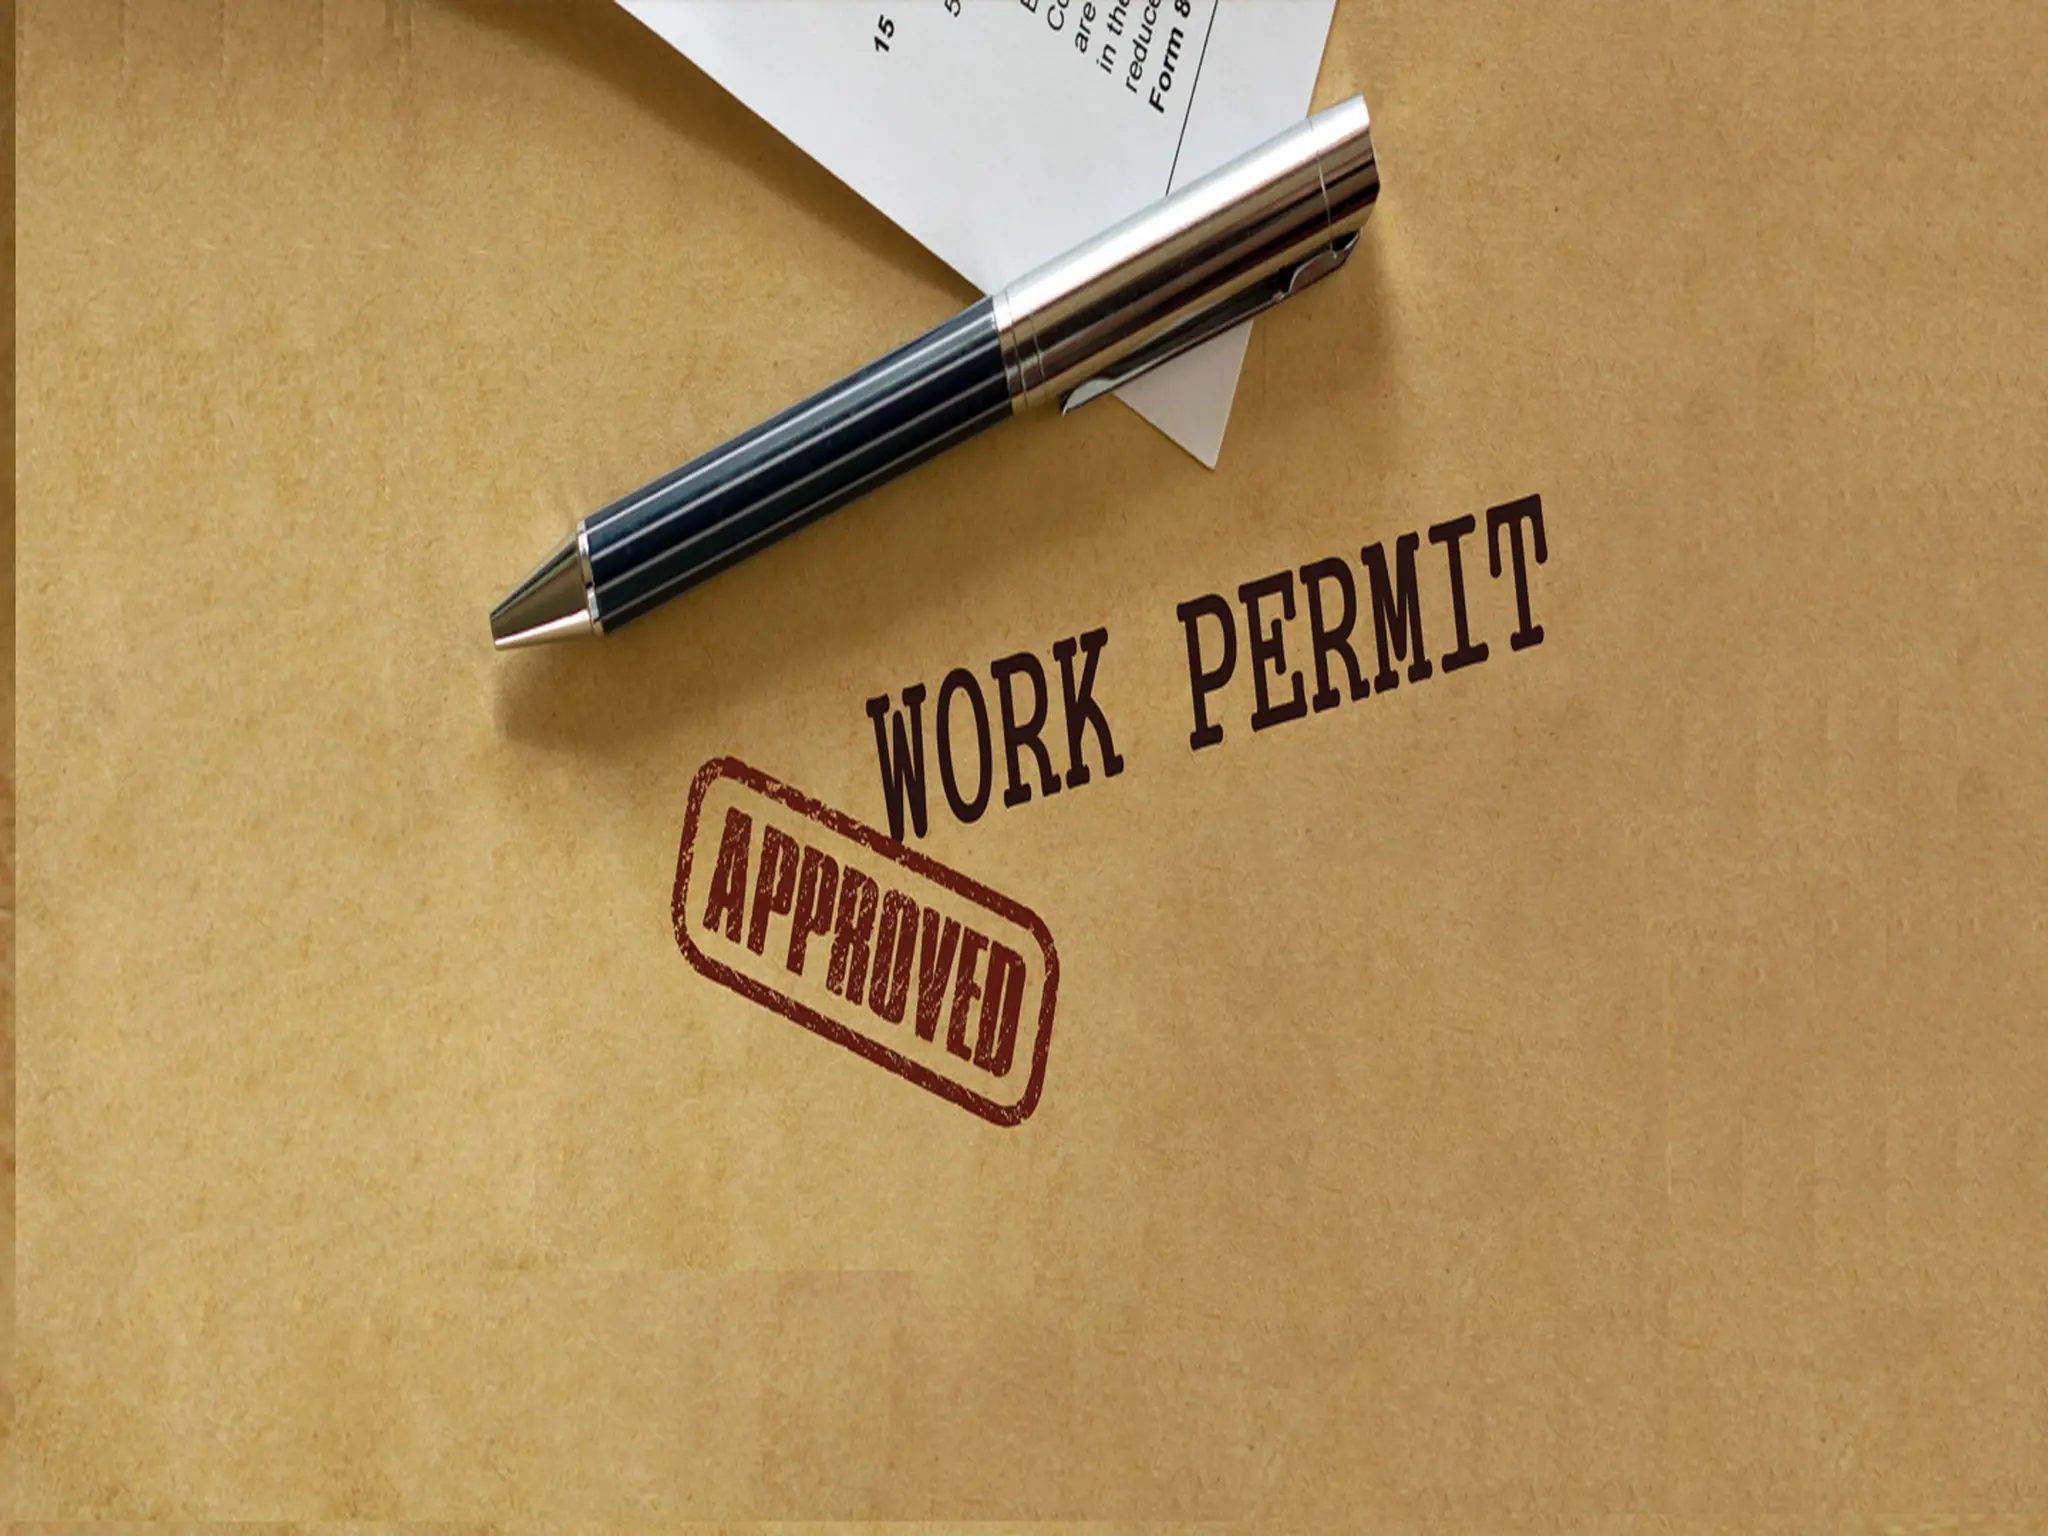 The date for amending the duration of work permits in the Emirates and raising the maximum salary